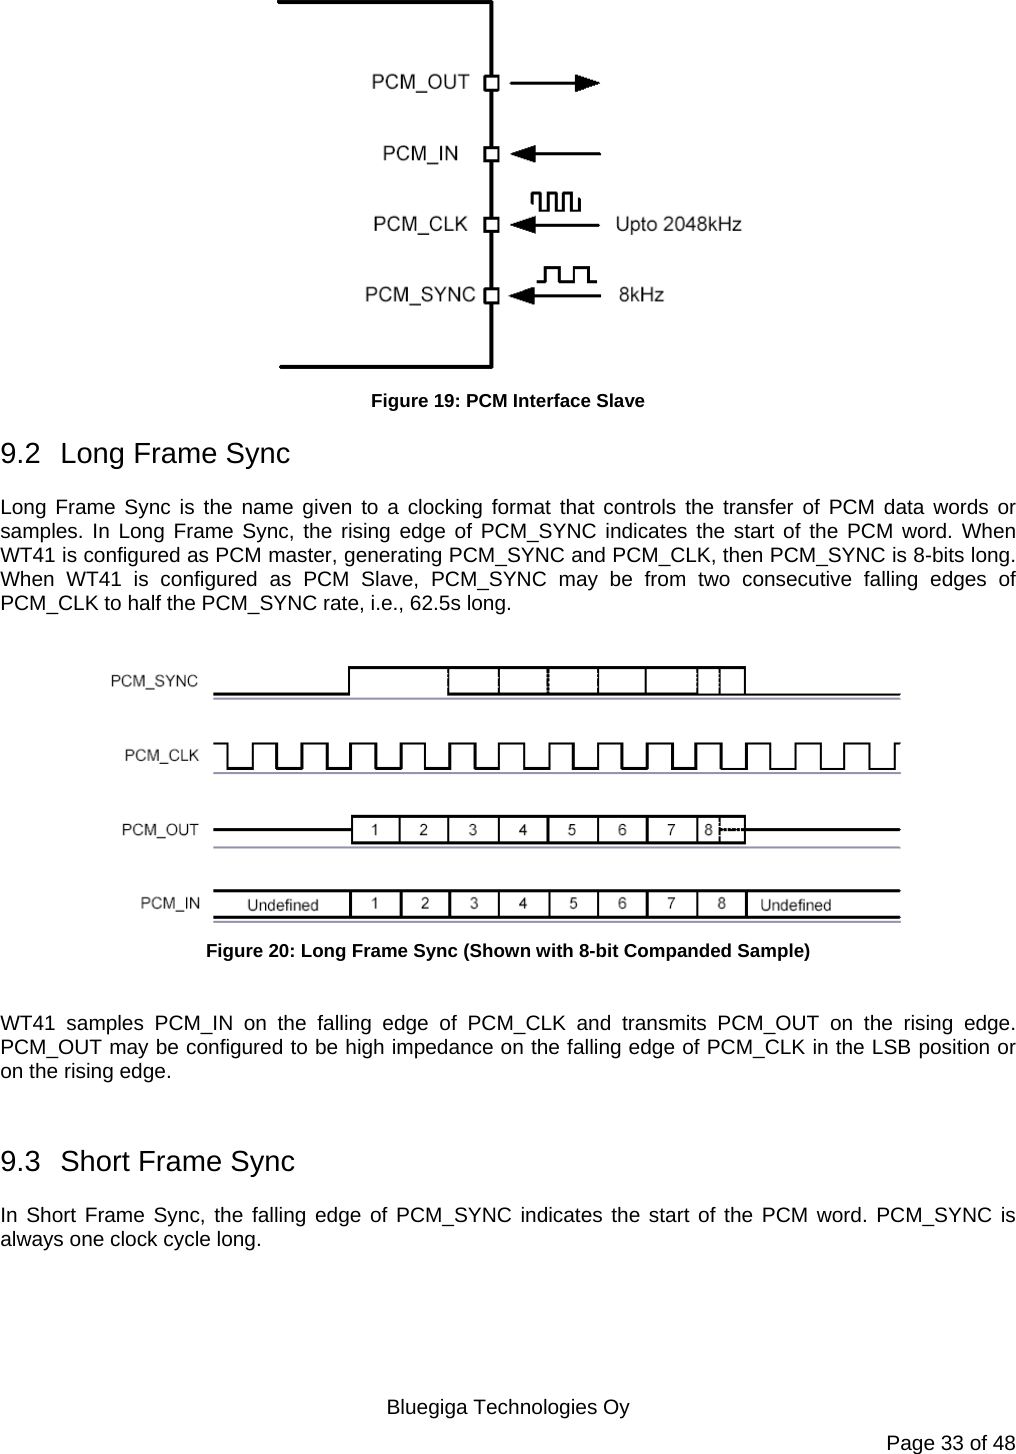   Bluegiga Technologies Oy Page 33 of 48  Figure 19: PCM Interface Slave 9.2  Long Frame Sync Long Frame Sync is the name given to a clocking format that controls the transfer of PCM data words or samples. In Long Frame Sync, the rising edge of PCM_SYNC indicates the start of the PCM word. When WT41 is configured as PCM master, generating PCM_SYNC and PCM_CLK, then PCM_SYNC is 8-bits long. When WT41 is configured as PCM Slave, PCM_SYNC may be from two consecutive falling edges of PCM_CLK to half the PCM_SYNC rate, i.e., 62.5s long.   Figure 20: Long Frame Sync (Shown with 8-bit Companded Sample)  WT41 samples PCM_IN on the falling edge of PCM_CLK and transmits PCM_OUT on the rising edge. PCM_OUT may be configured to be high impedance on the falling edge of PCM_CLK in the LSB position or on the rising edge.  9.3  Short Frame Sync In Short Frame Sync, the falling edge of PCM_SYNC indicates the start of the PCM word. PCM_SYNC is always one clock cycle long. 